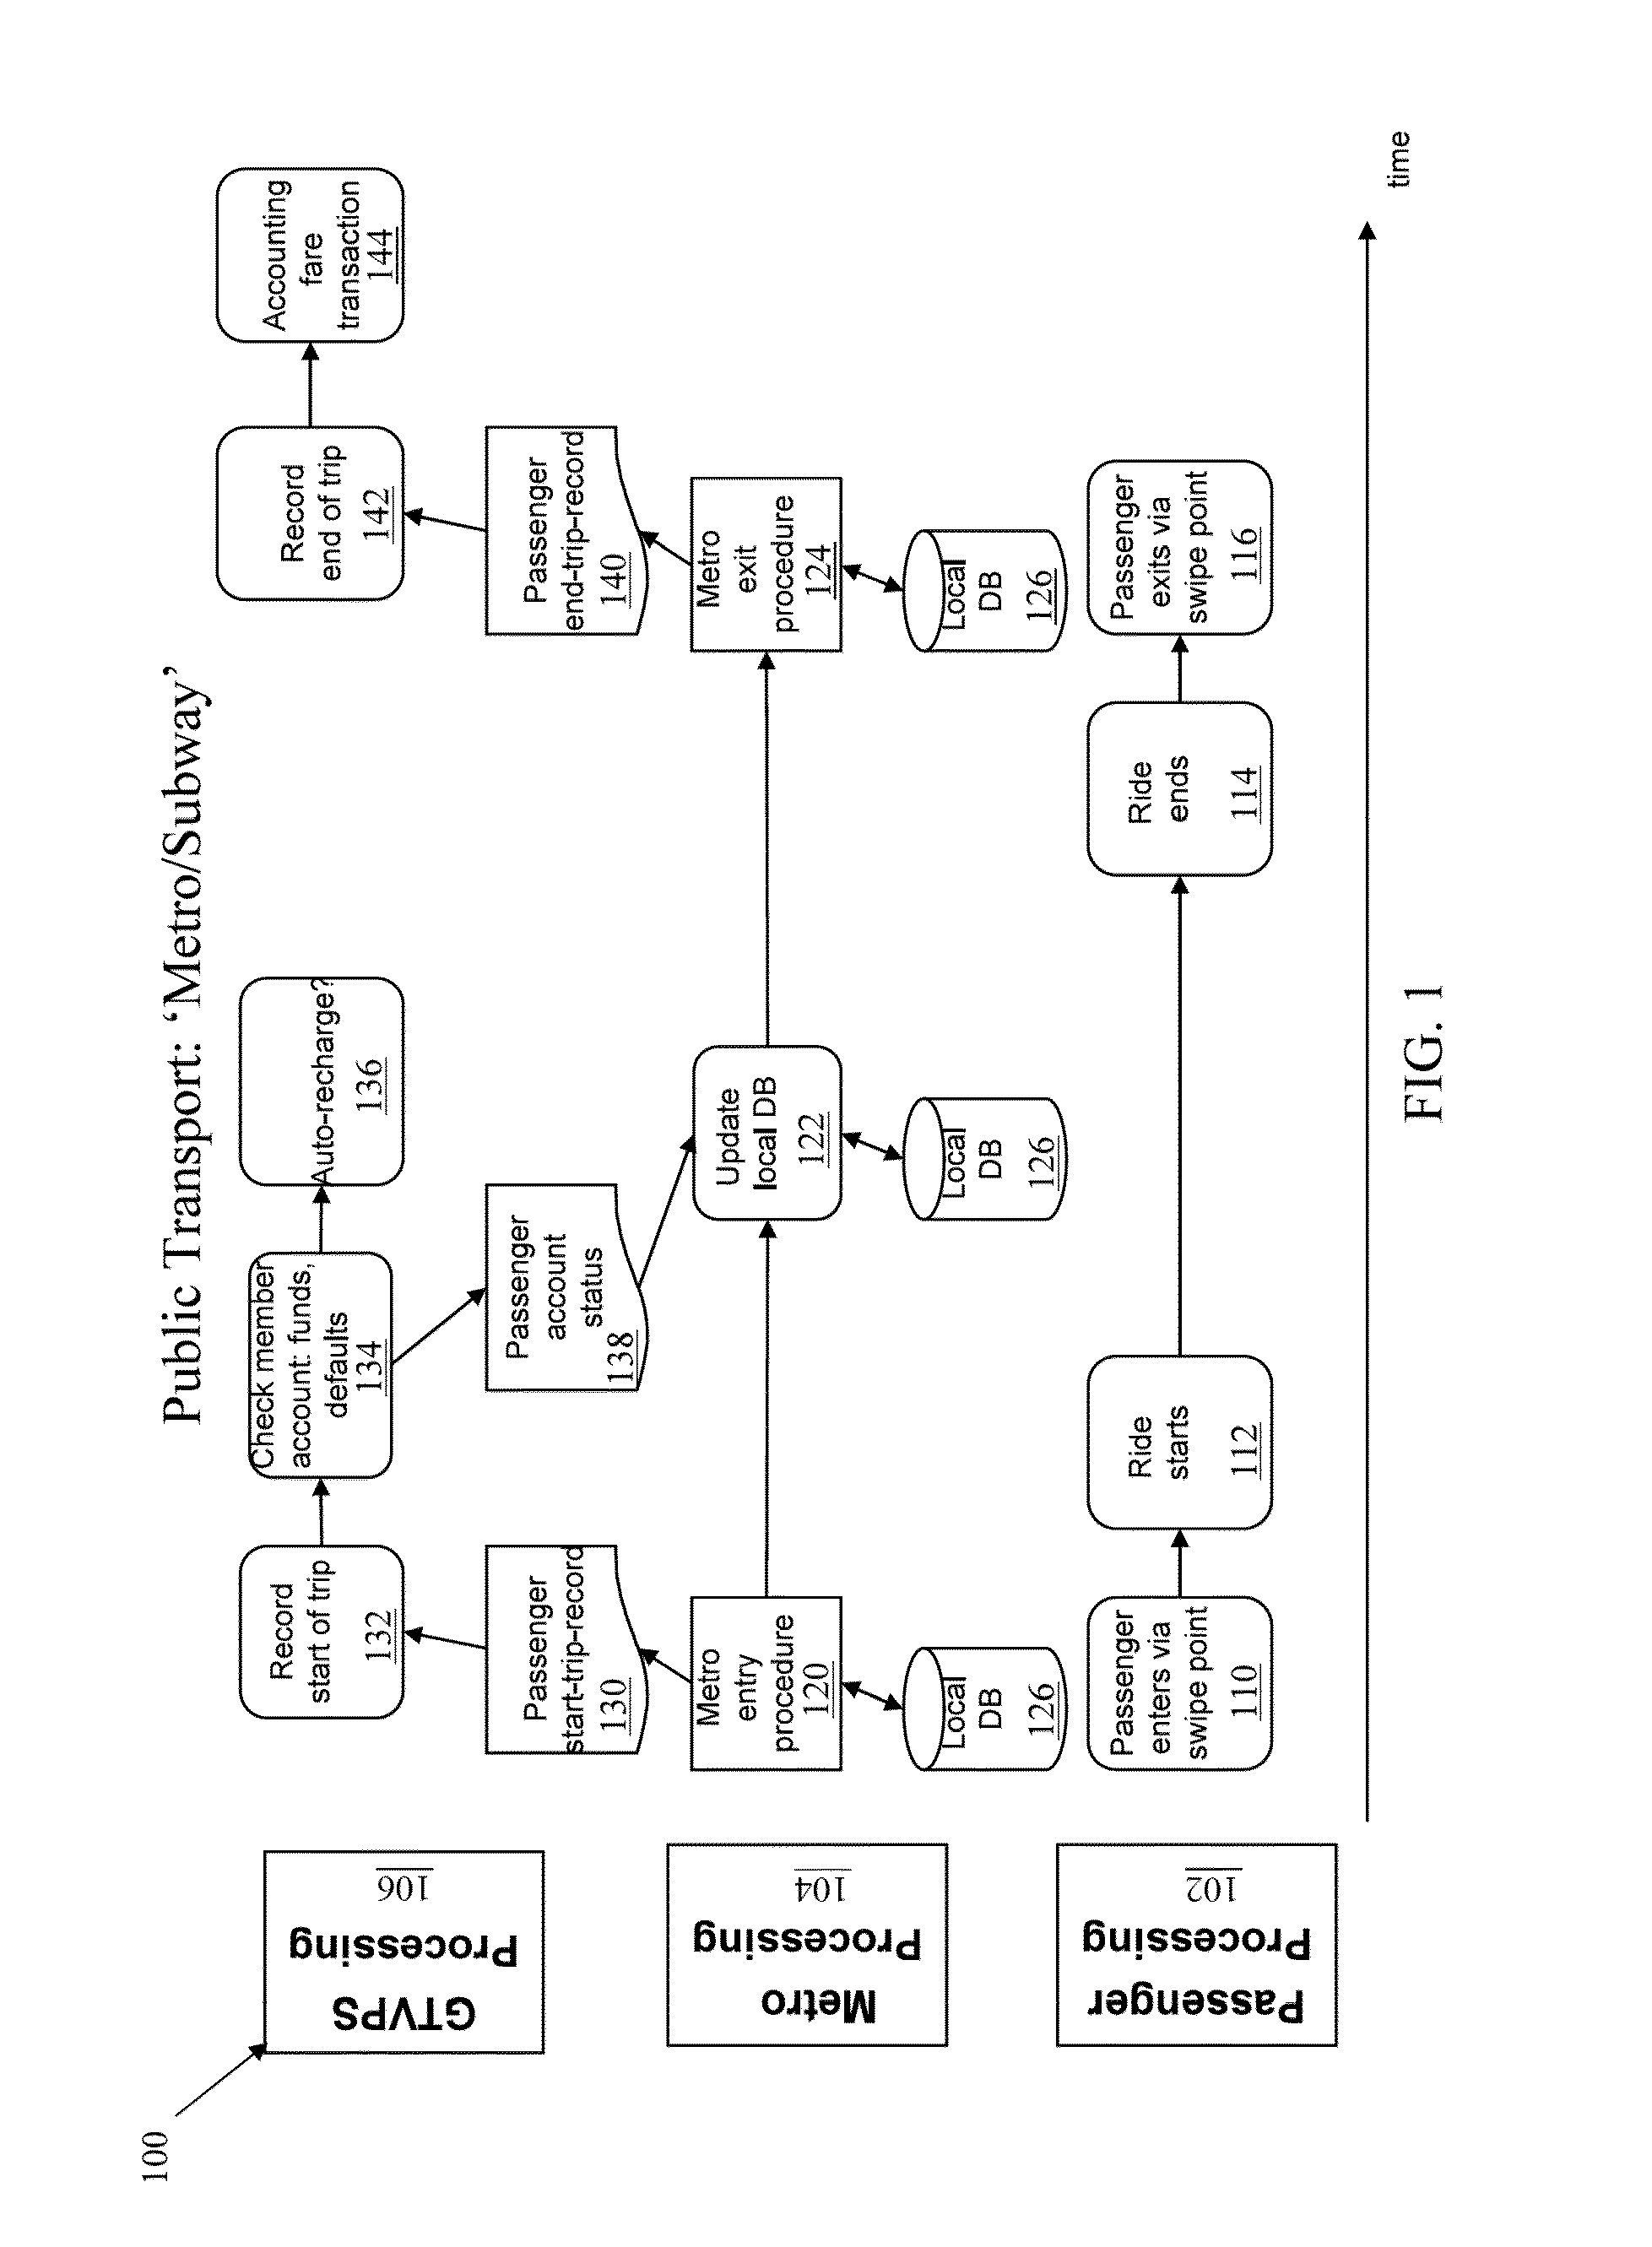 Systems and methods for global transportation,vetting, and payment